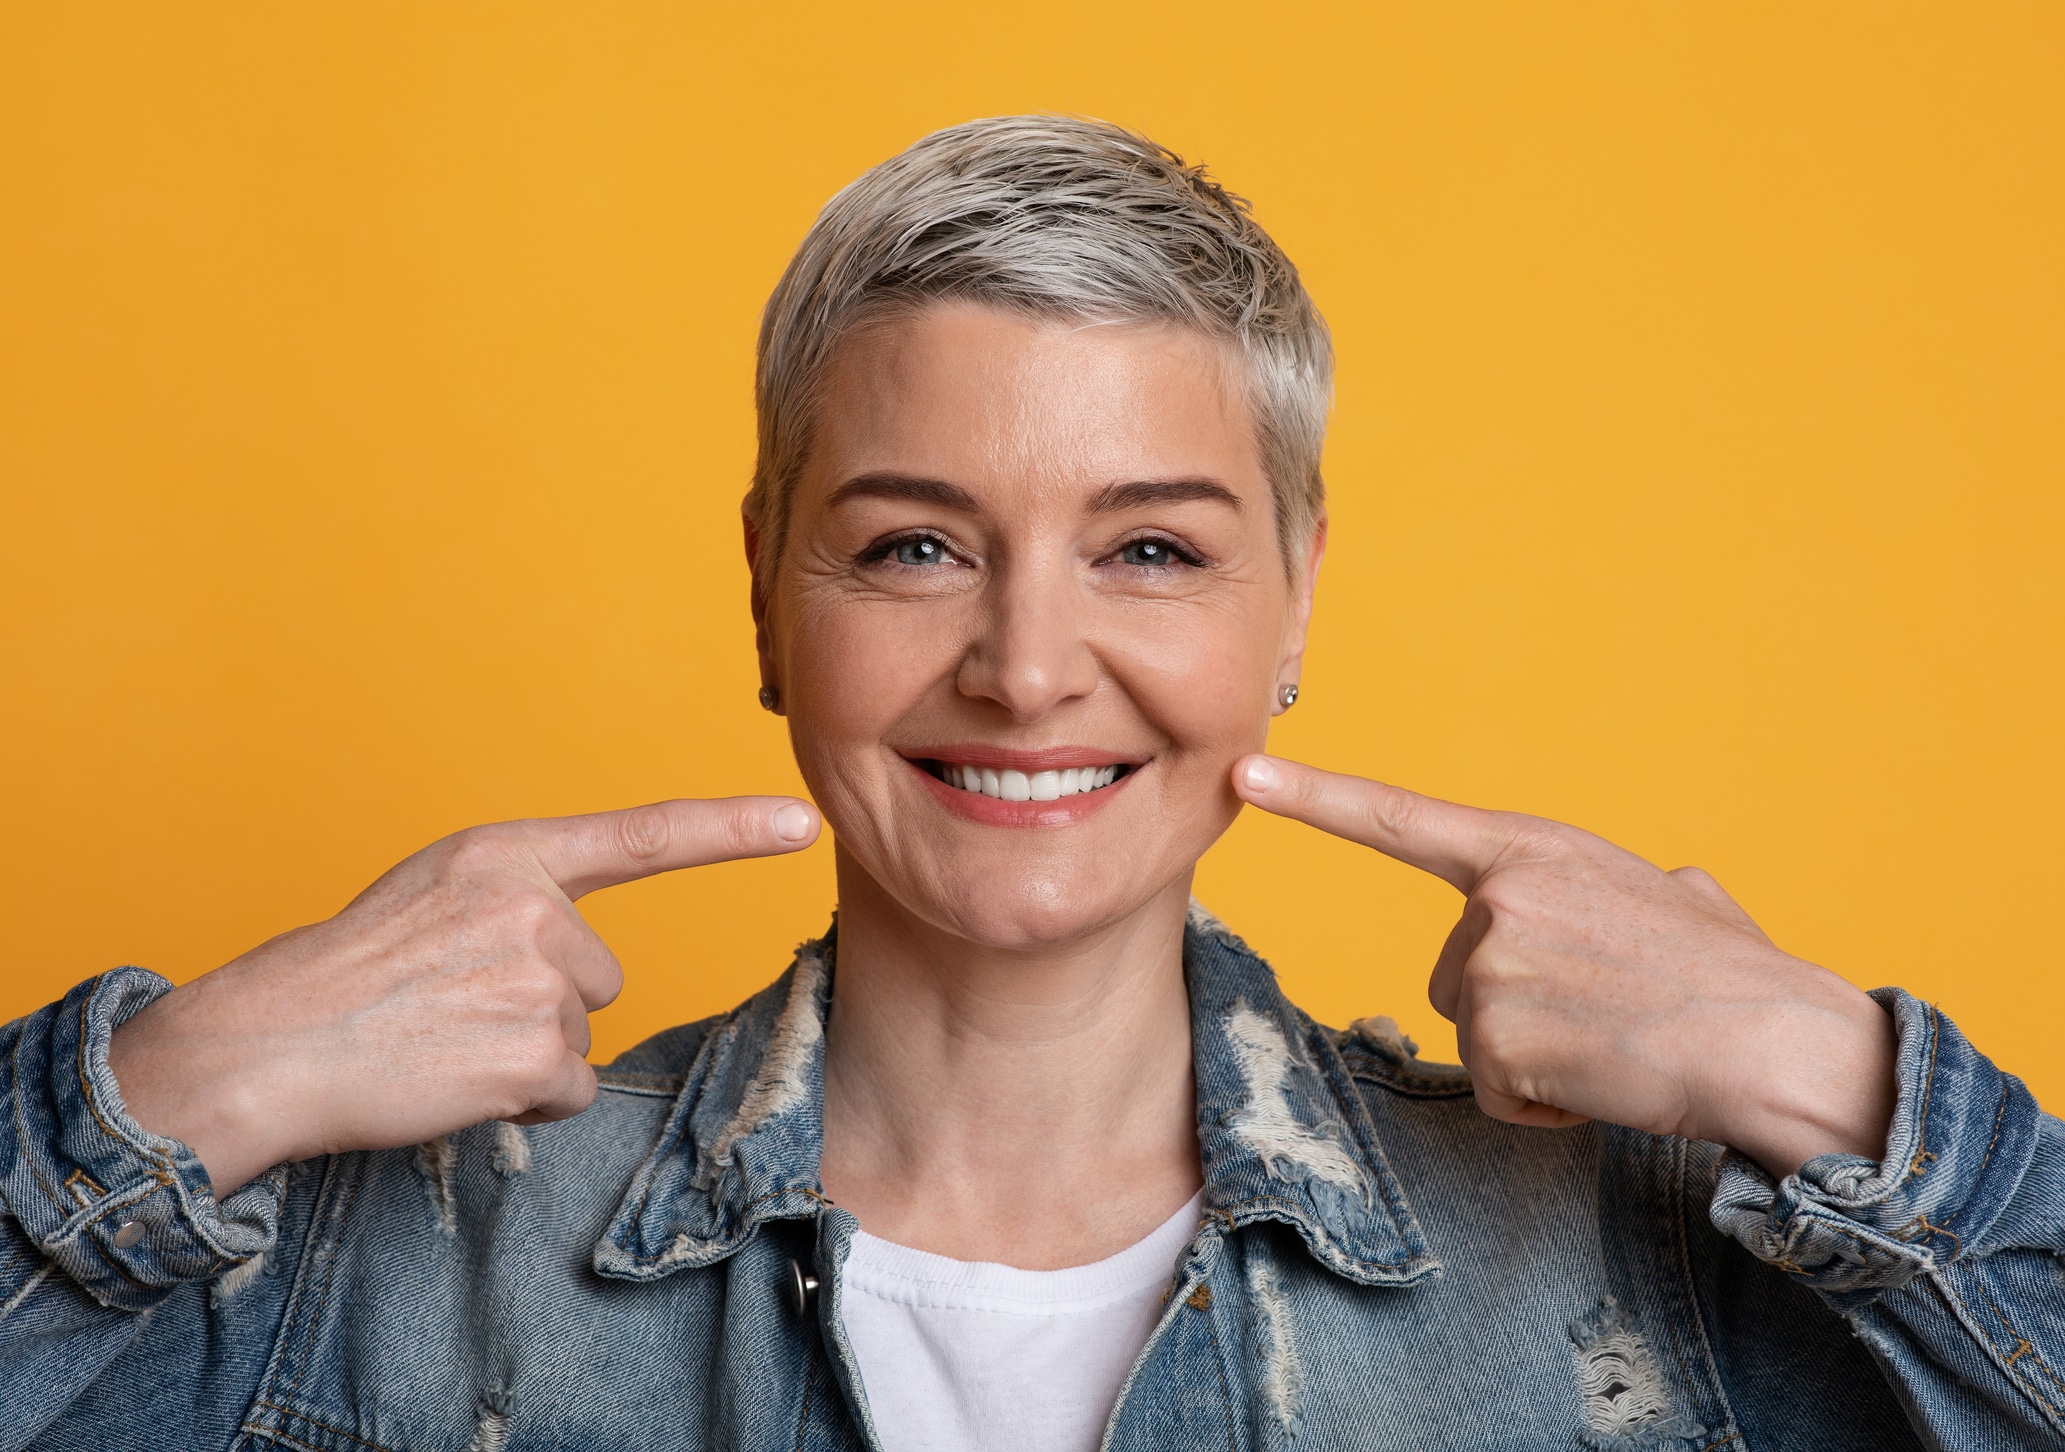 Woman pointing at her teeth while smiling